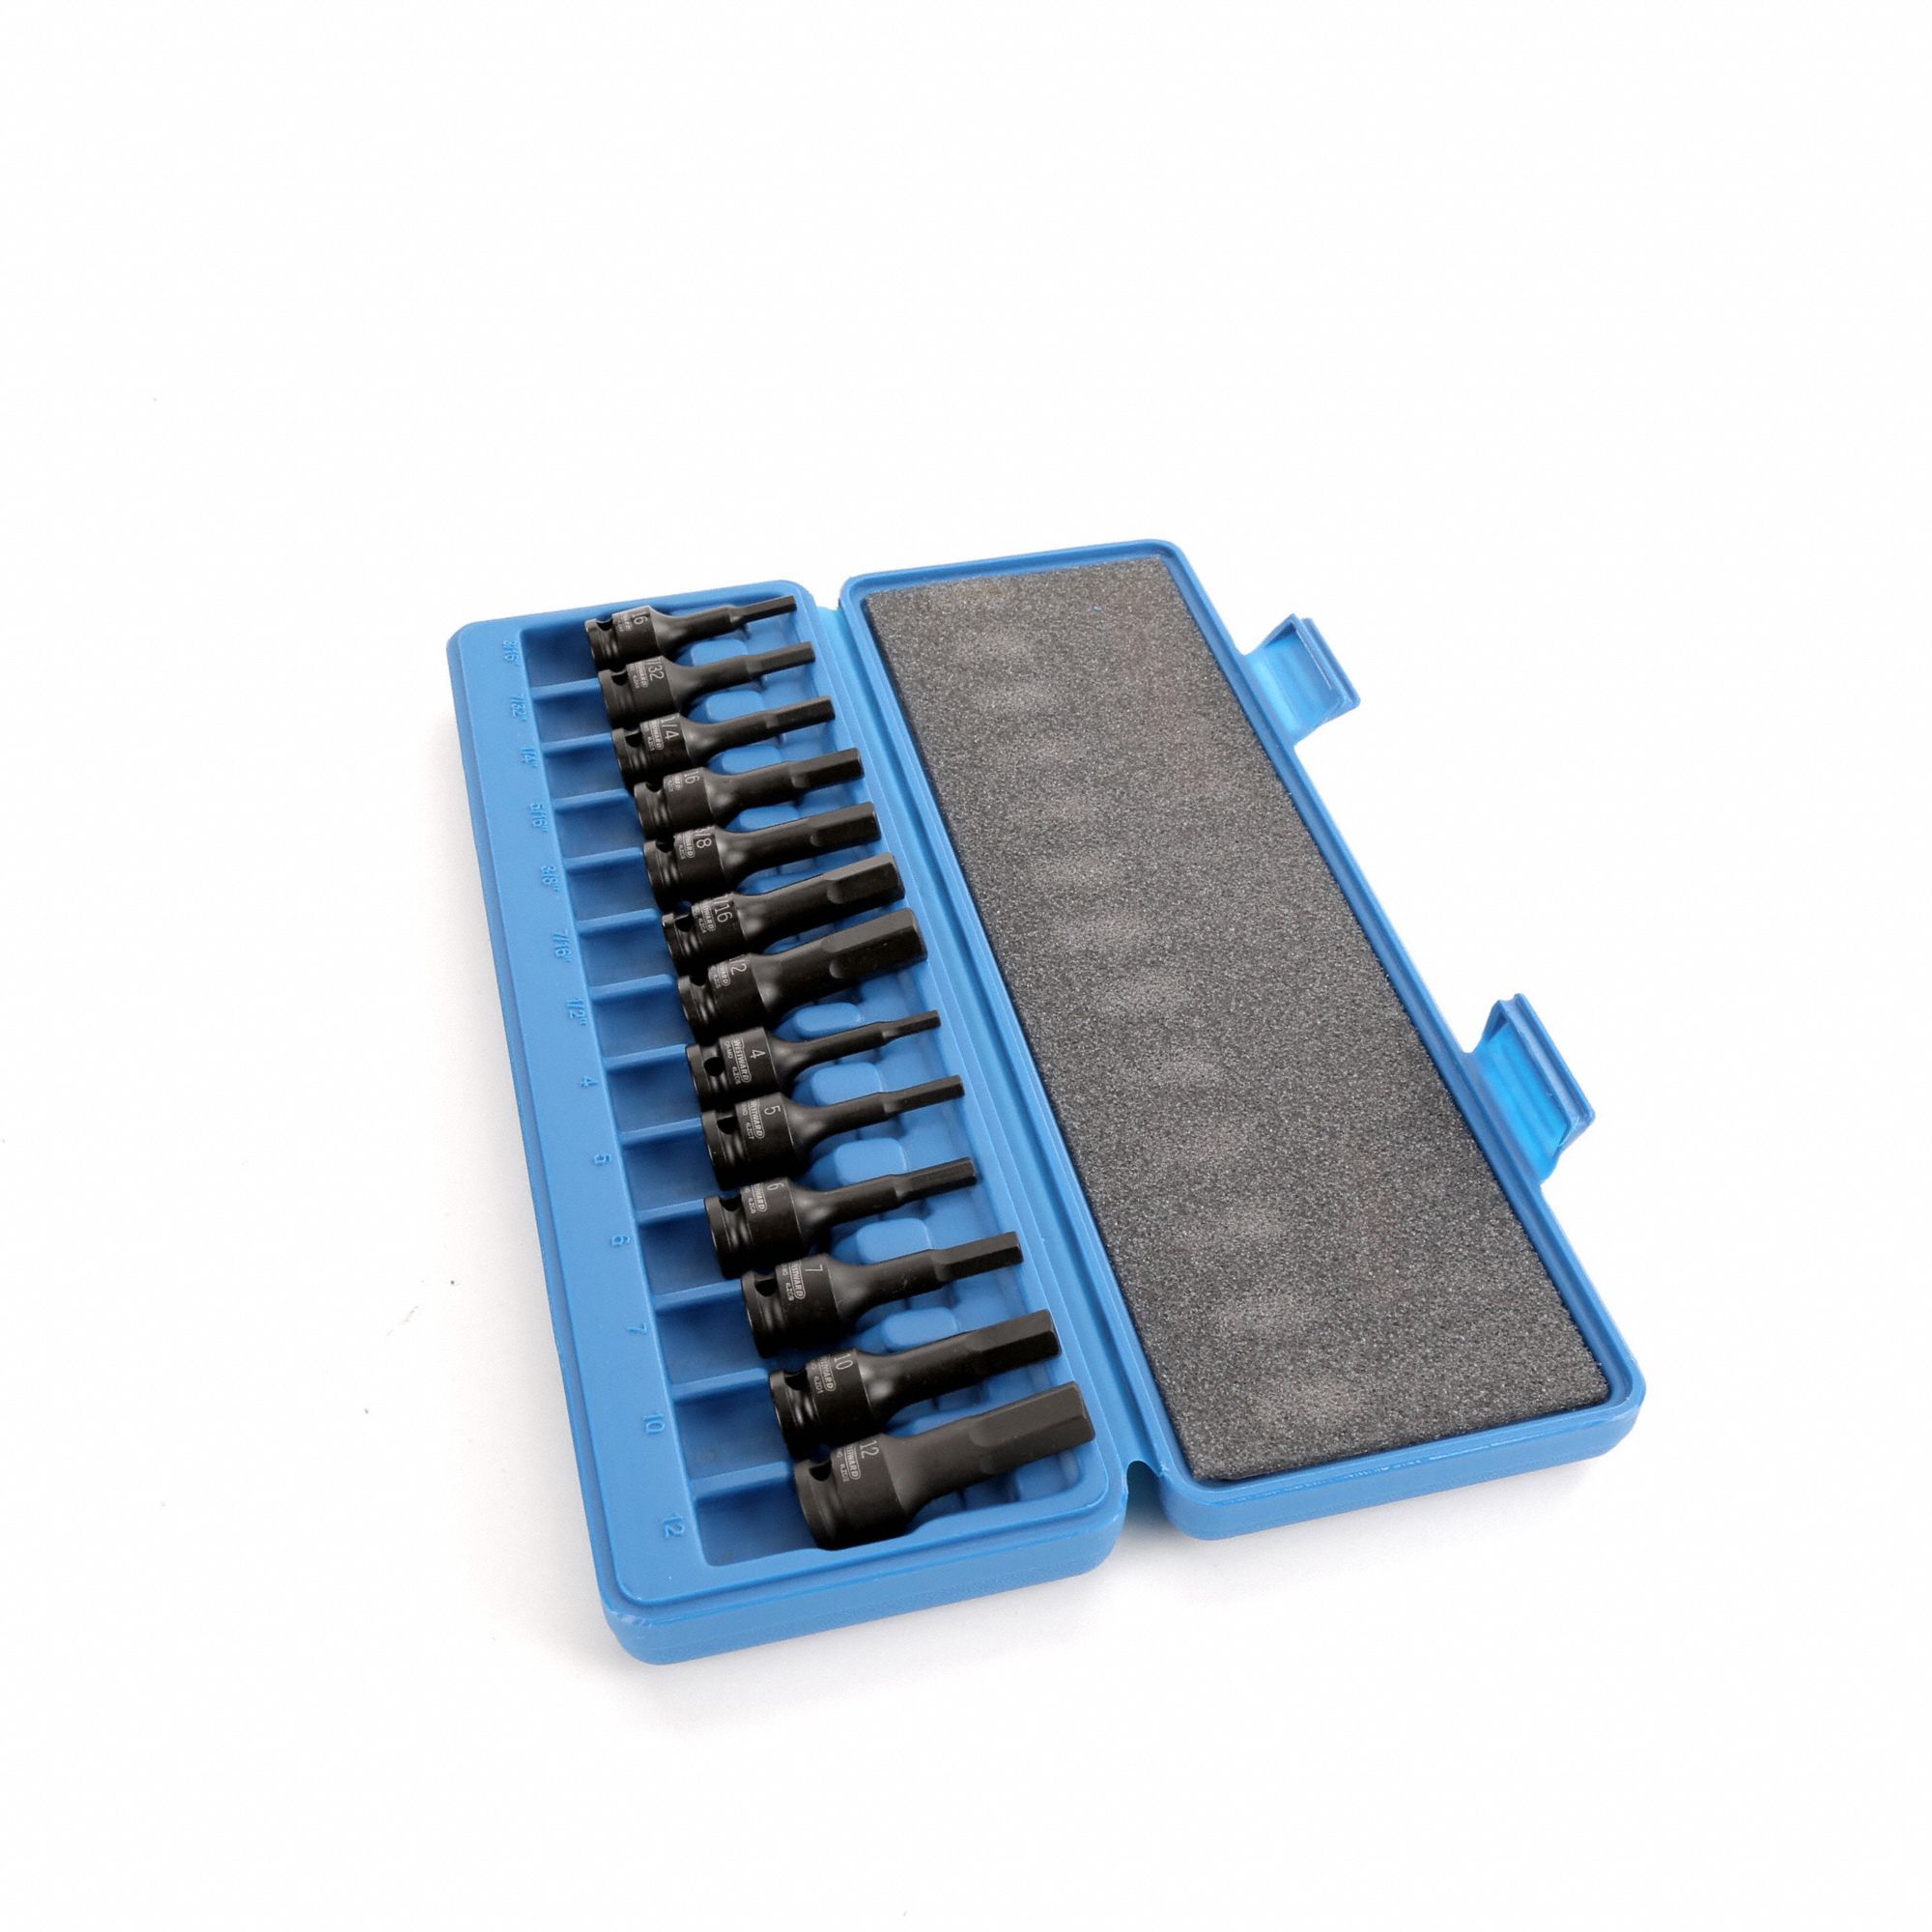 WESTWARD Socket Bit Set: 3/8 in Drive Size, 27 Pieces, 1 27/32 in Overall  Lg, Metric/SAE